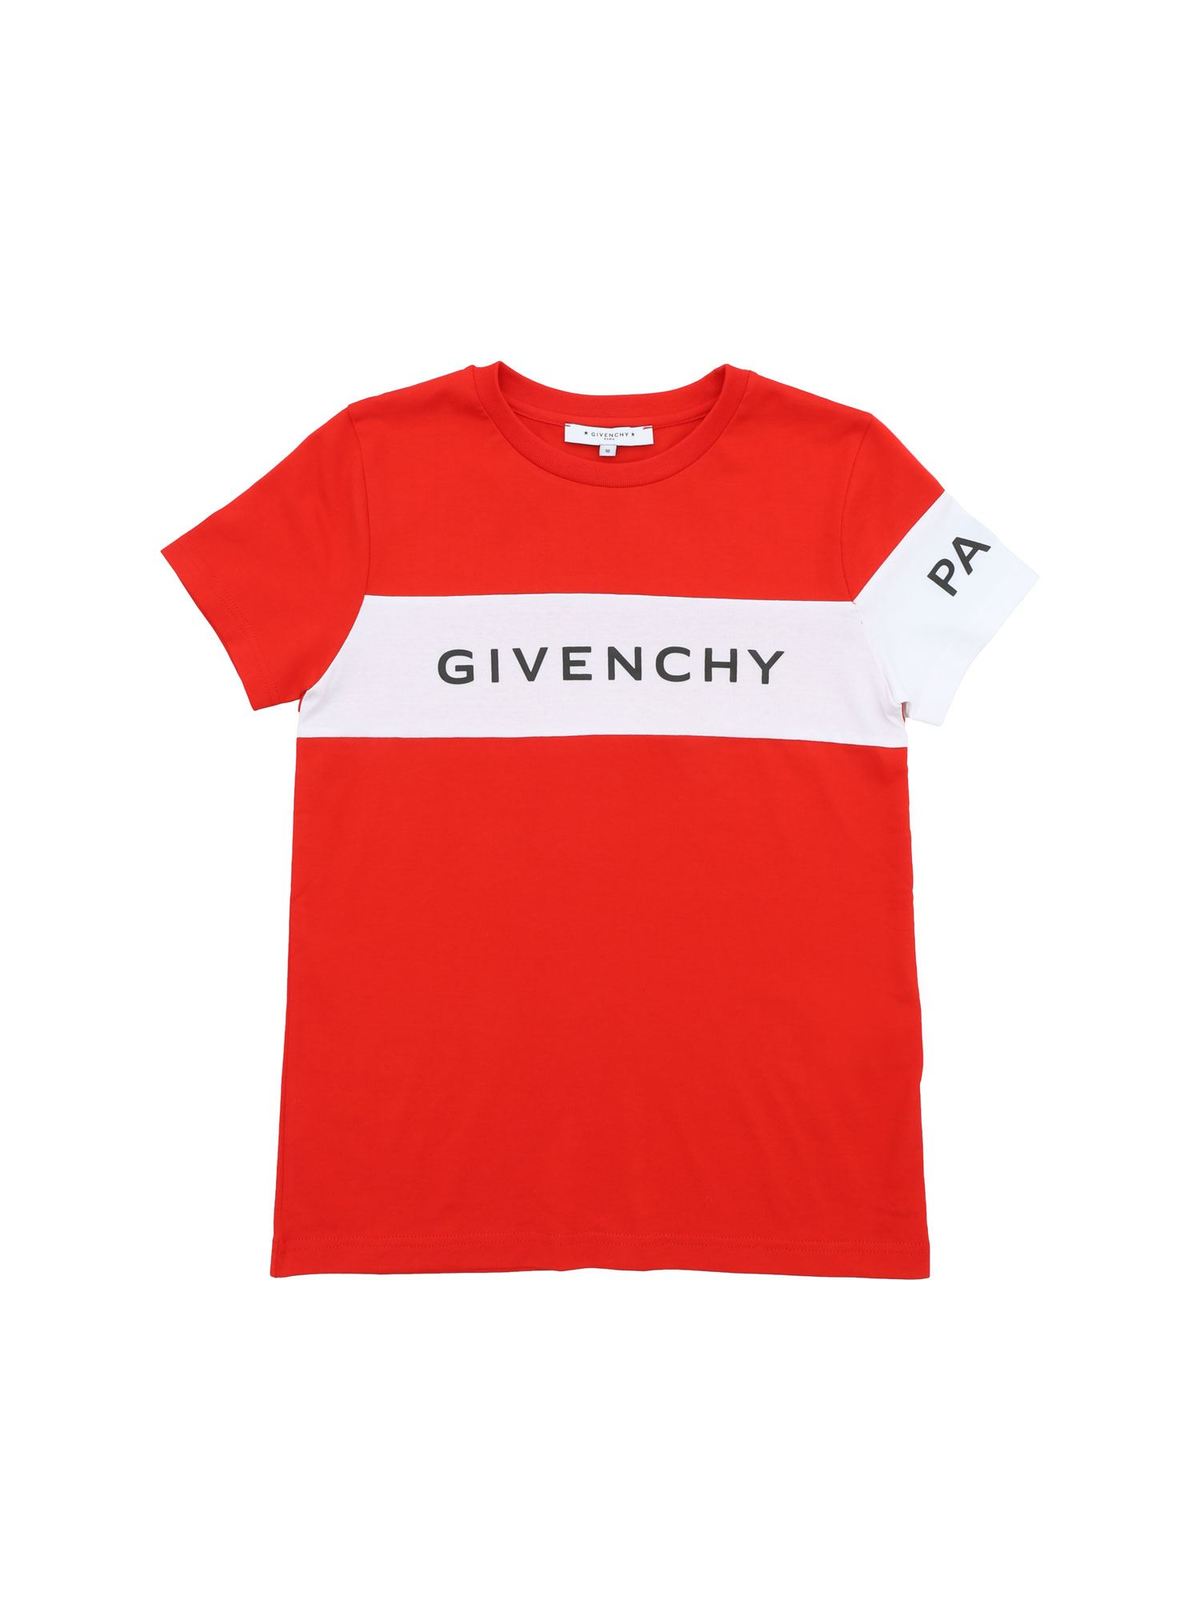 Top 92+ imagen red and white givenchy shirt